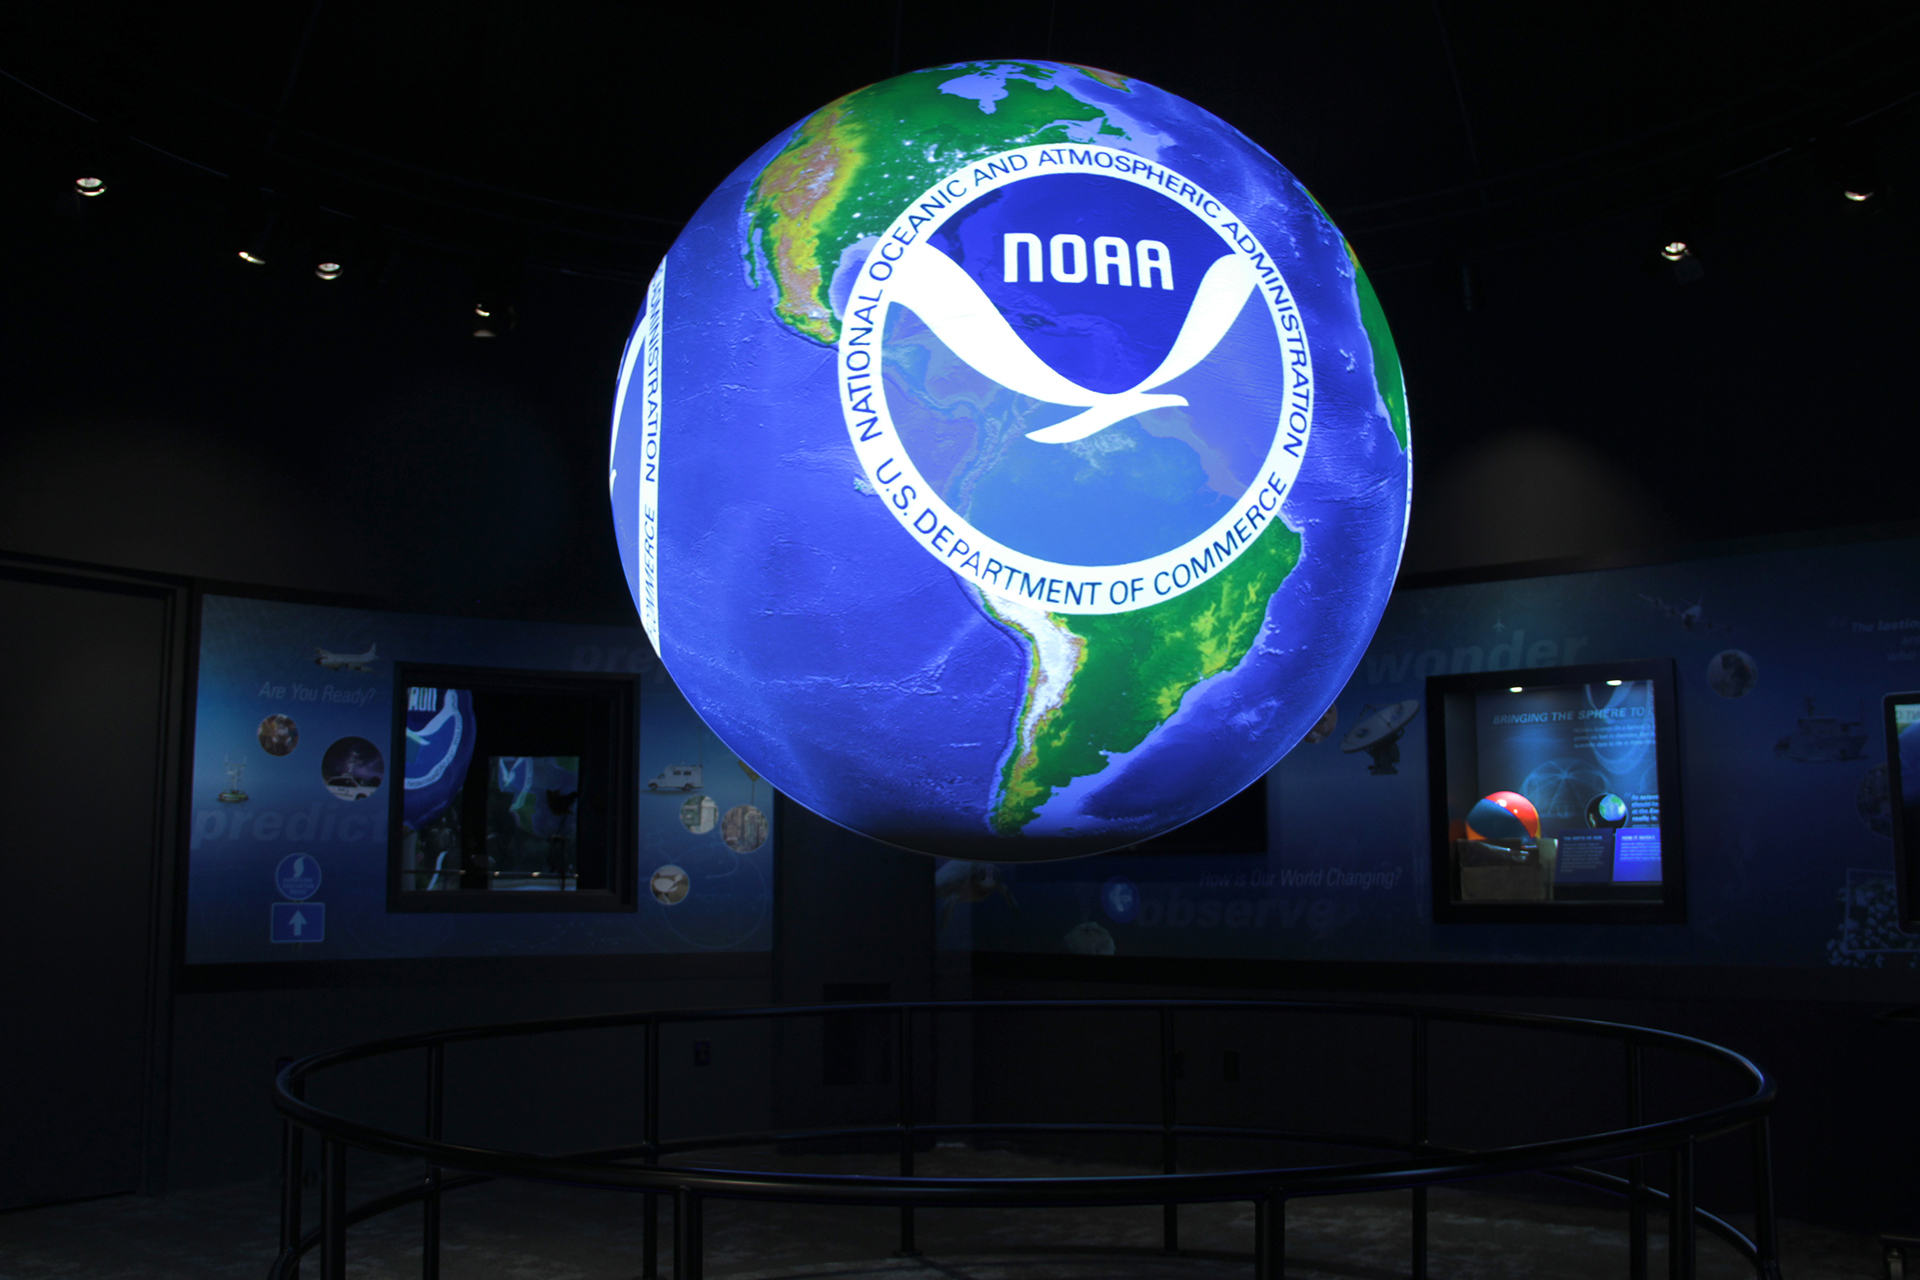 Science On a Sphere displays the NOAA logo atop an image of Earth. In the background, display cases containing other NOAA-related objects are visible